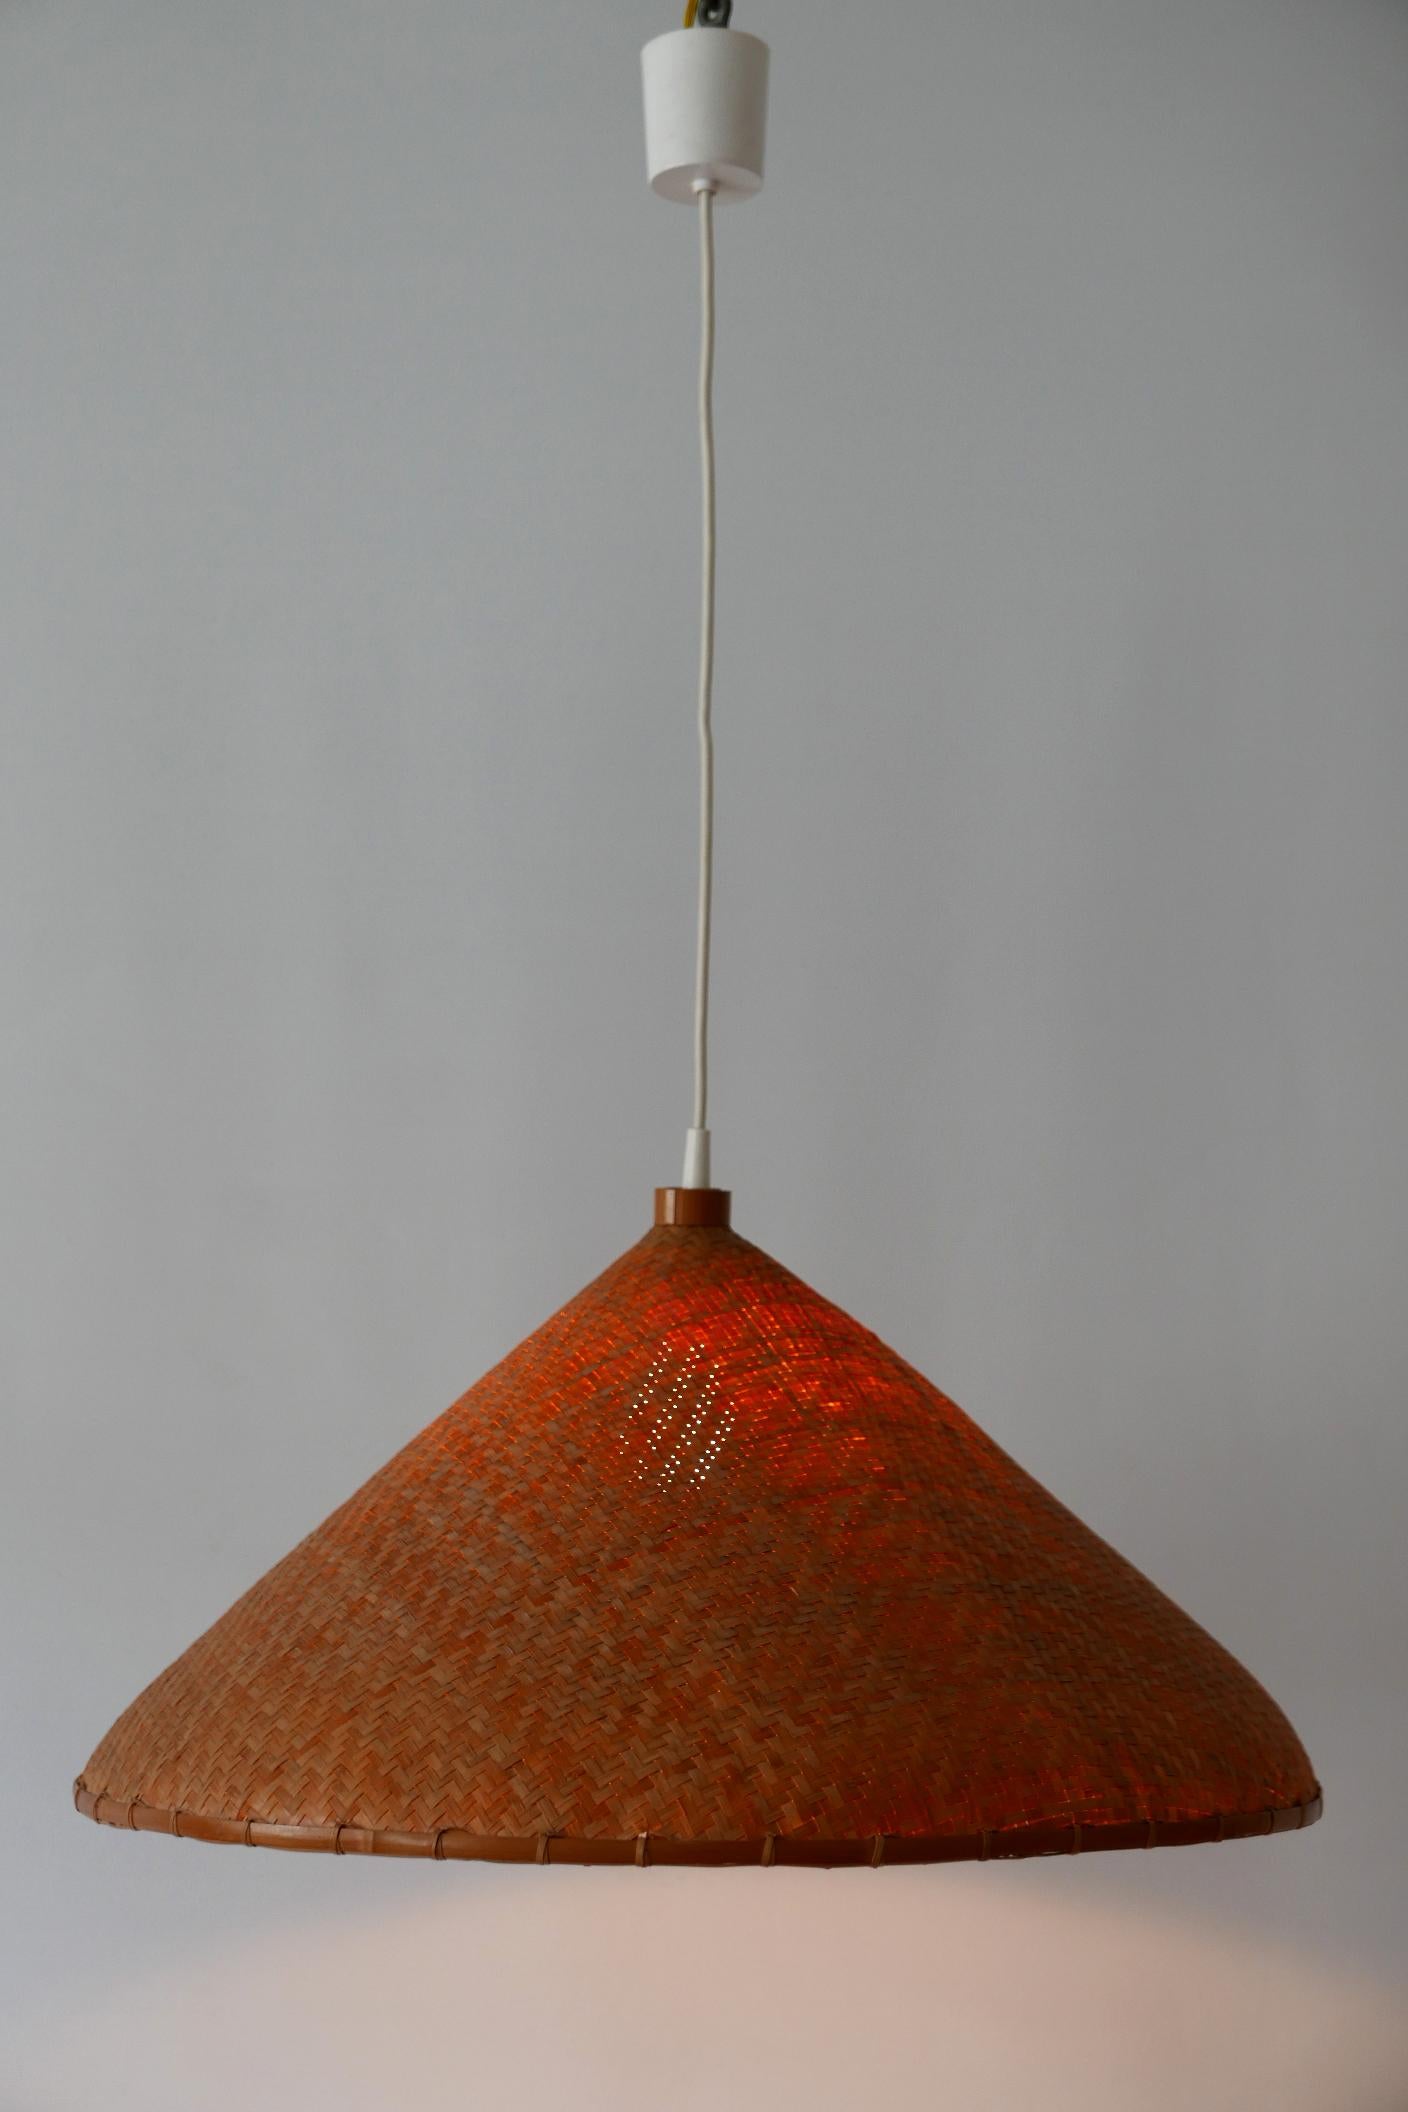 Mid-20th Century Large Mid-Century Modern Wicker Pendant Lamp or Hanging Light, Germany, 1960s For Sale